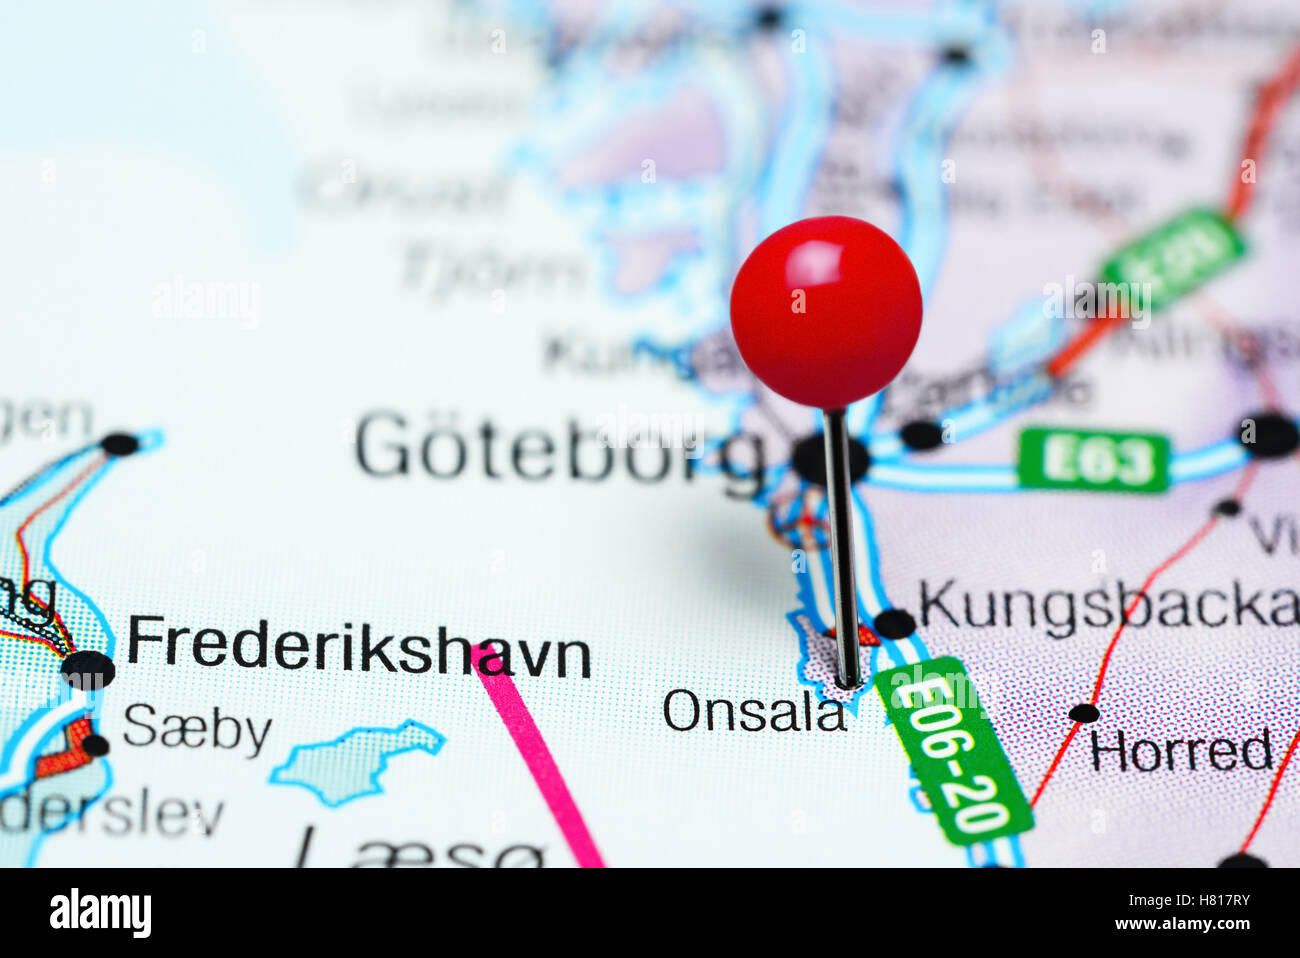 Onsala pinned on a map of Sweden Stock Photo